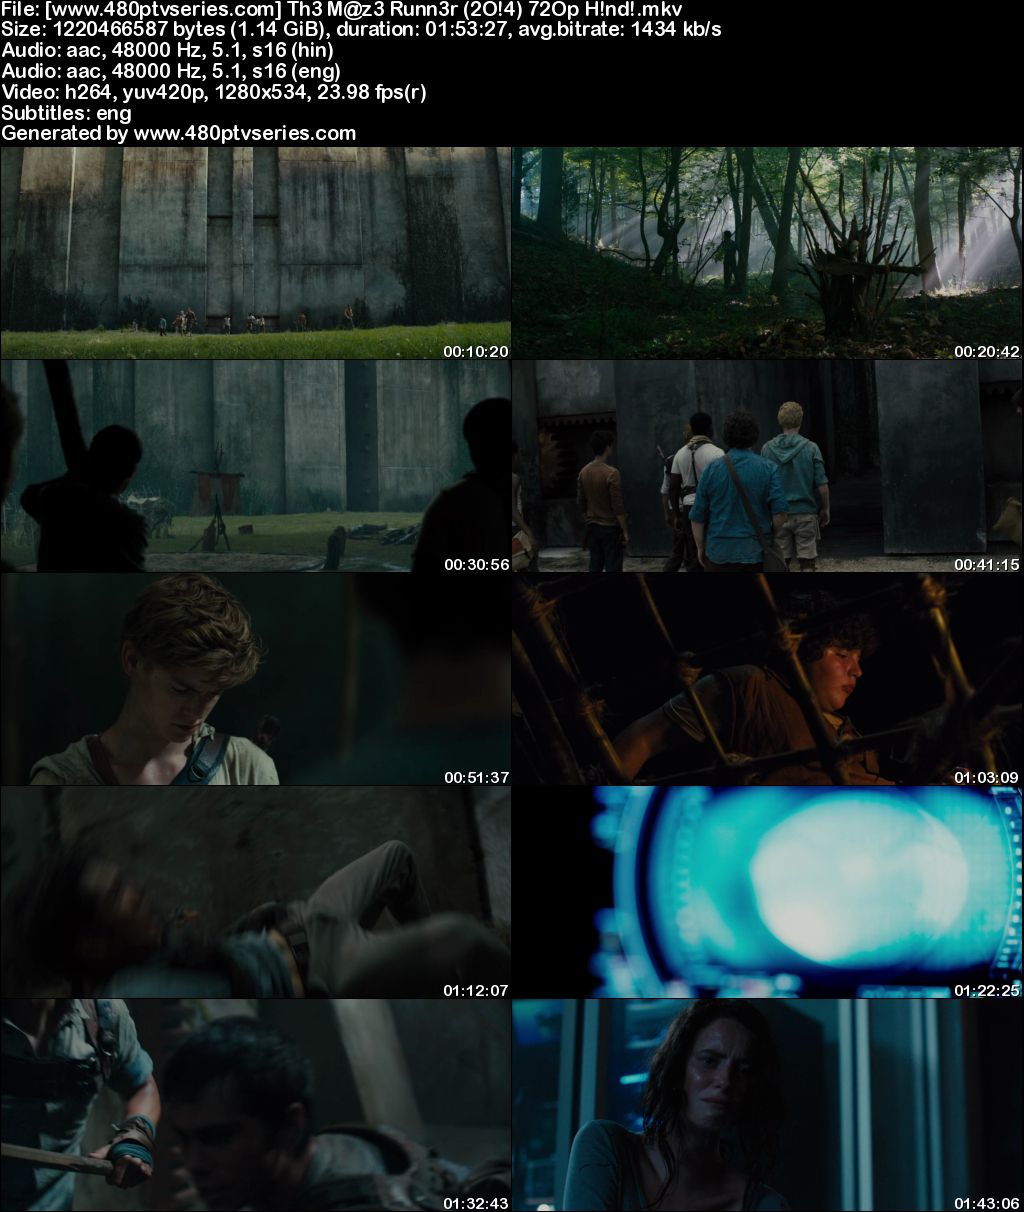 Download The Maze Runner (2014) 1GB Full Hindi Dual Audio Movie Download 720p Bluray Free Watch Online Full Movie Download Worldfree4u 9xmovies